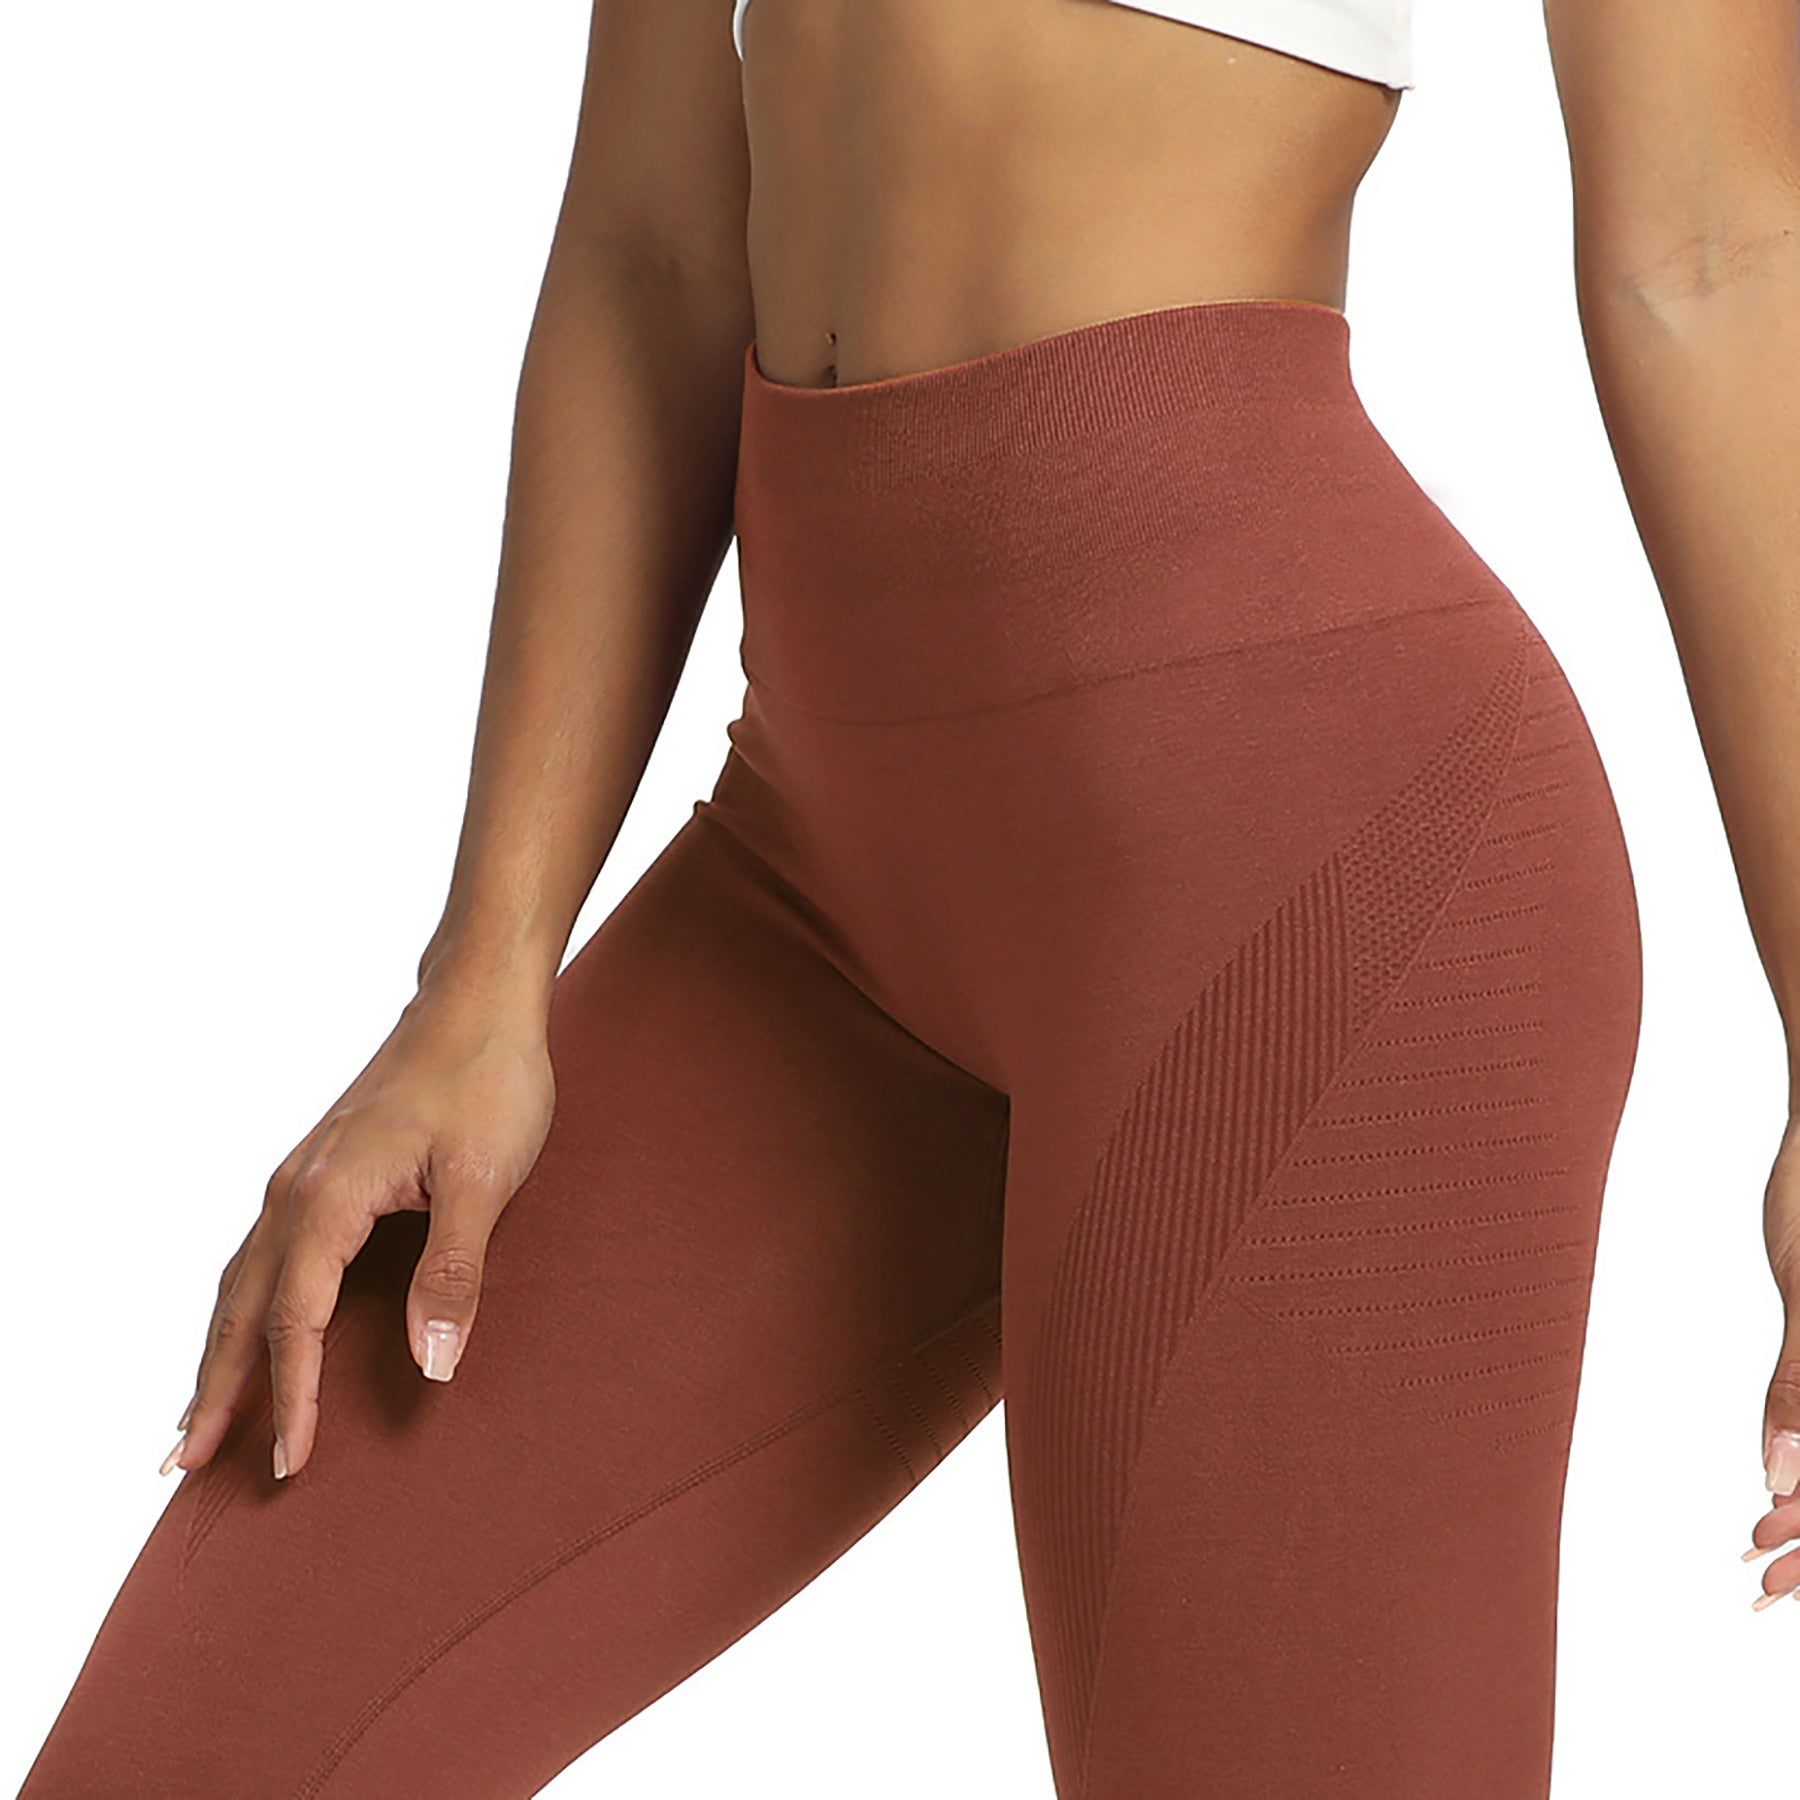 Aoxjox Carbon Collection Leggings